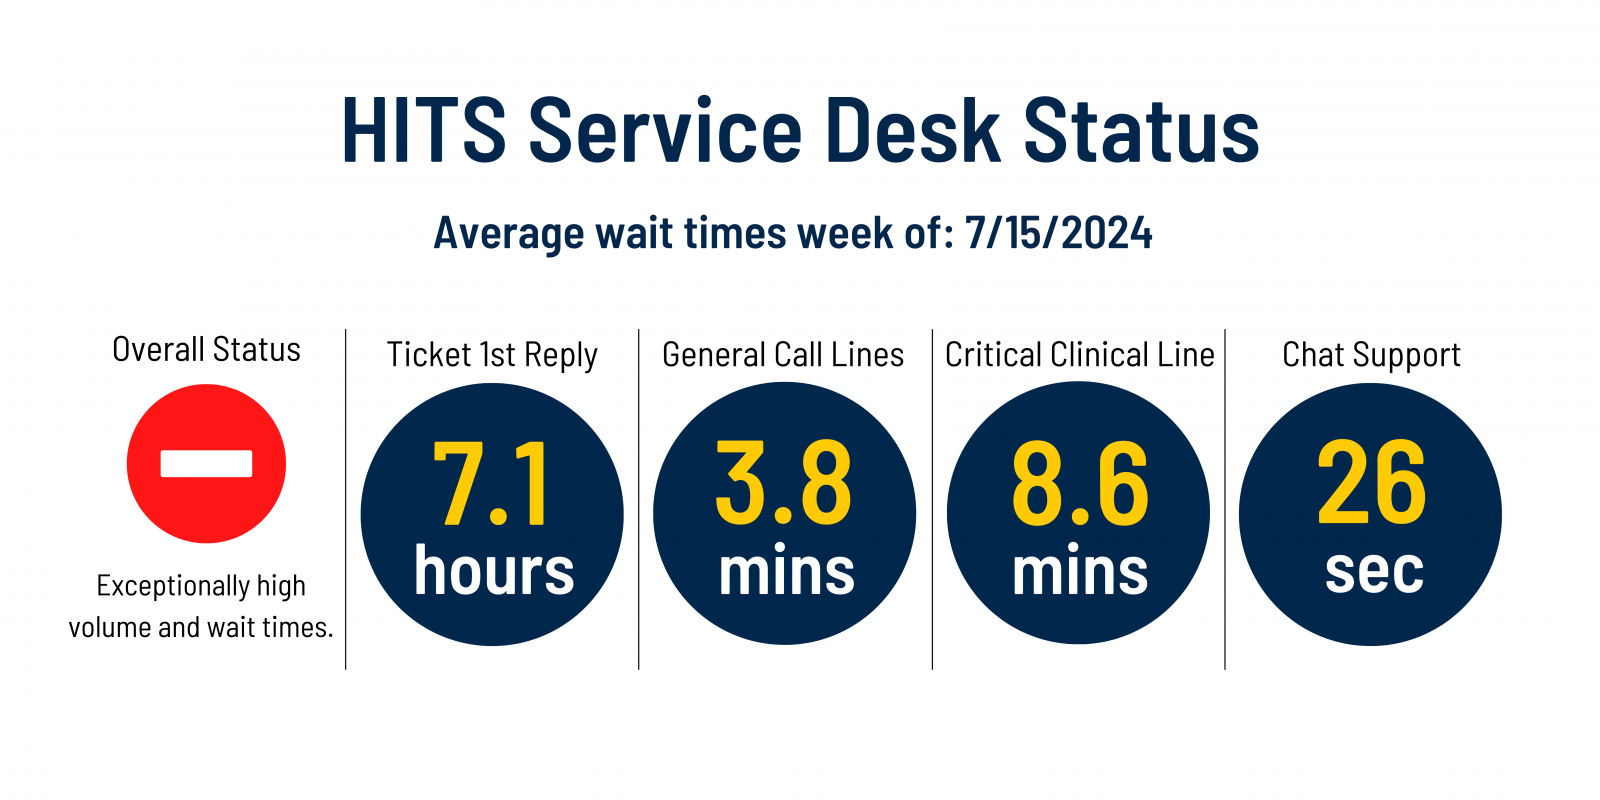 Service Desk current status is red. Exceptionally high volume and wait times.